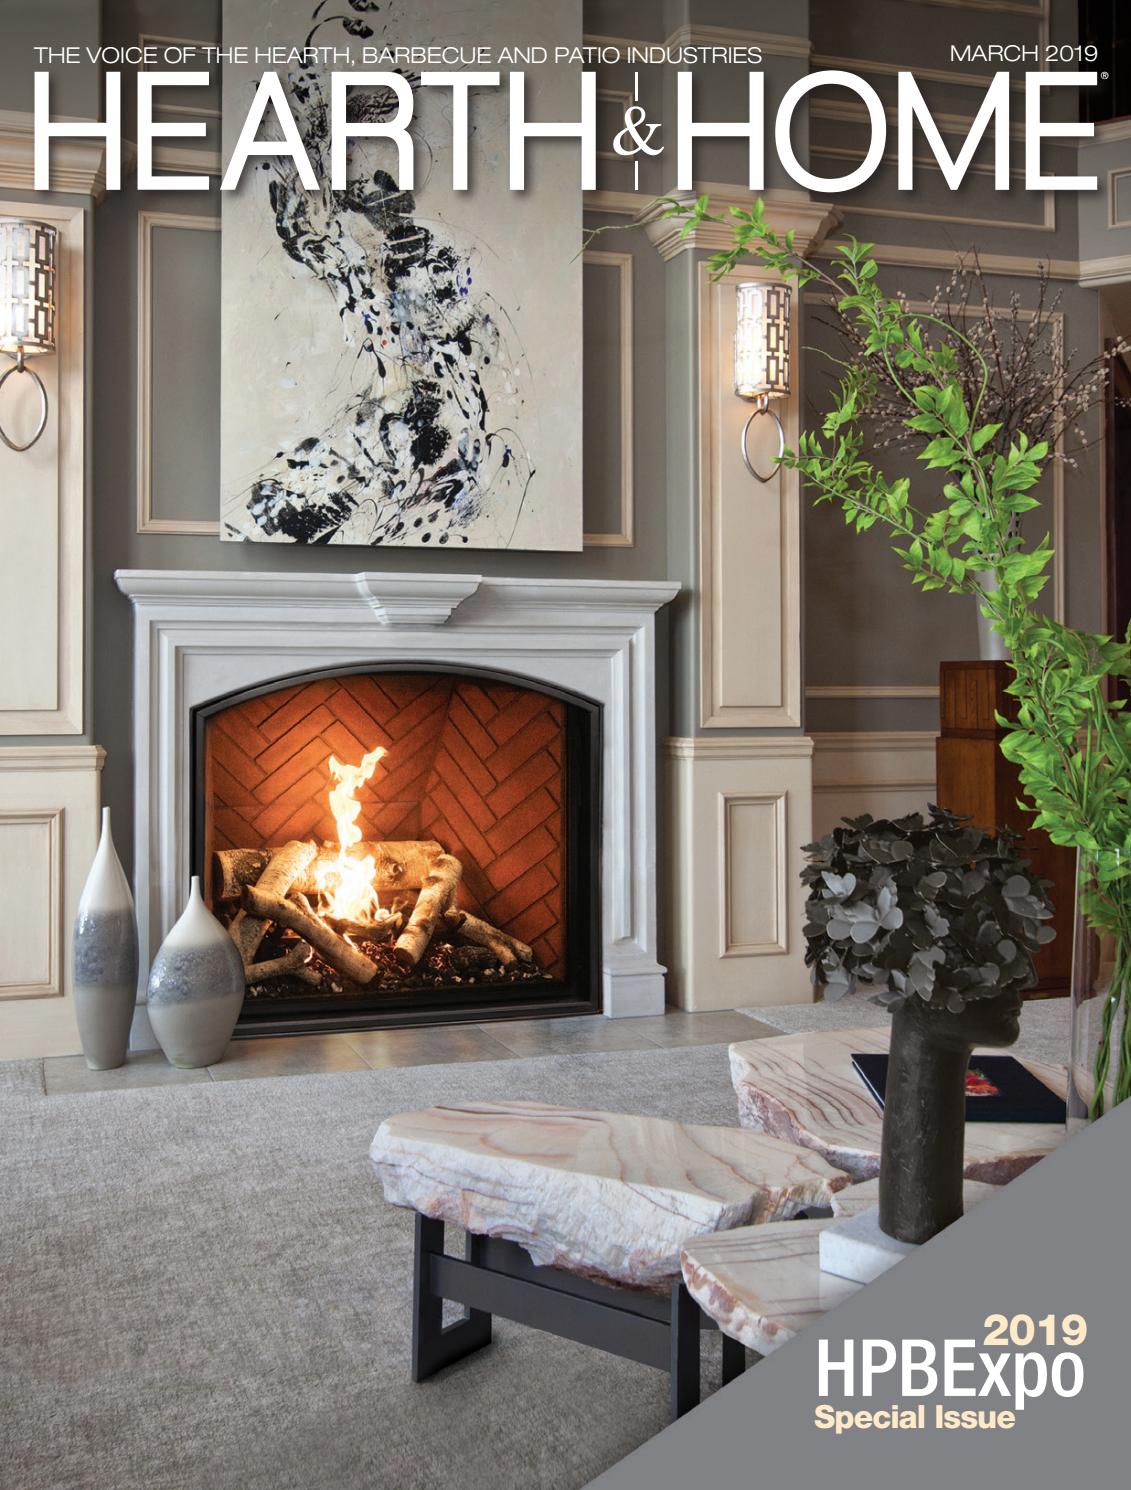 Gas Fireplace Insert Ideas Awesome Hearth & Home Magazine – 2019 March issue by Hearth & Home